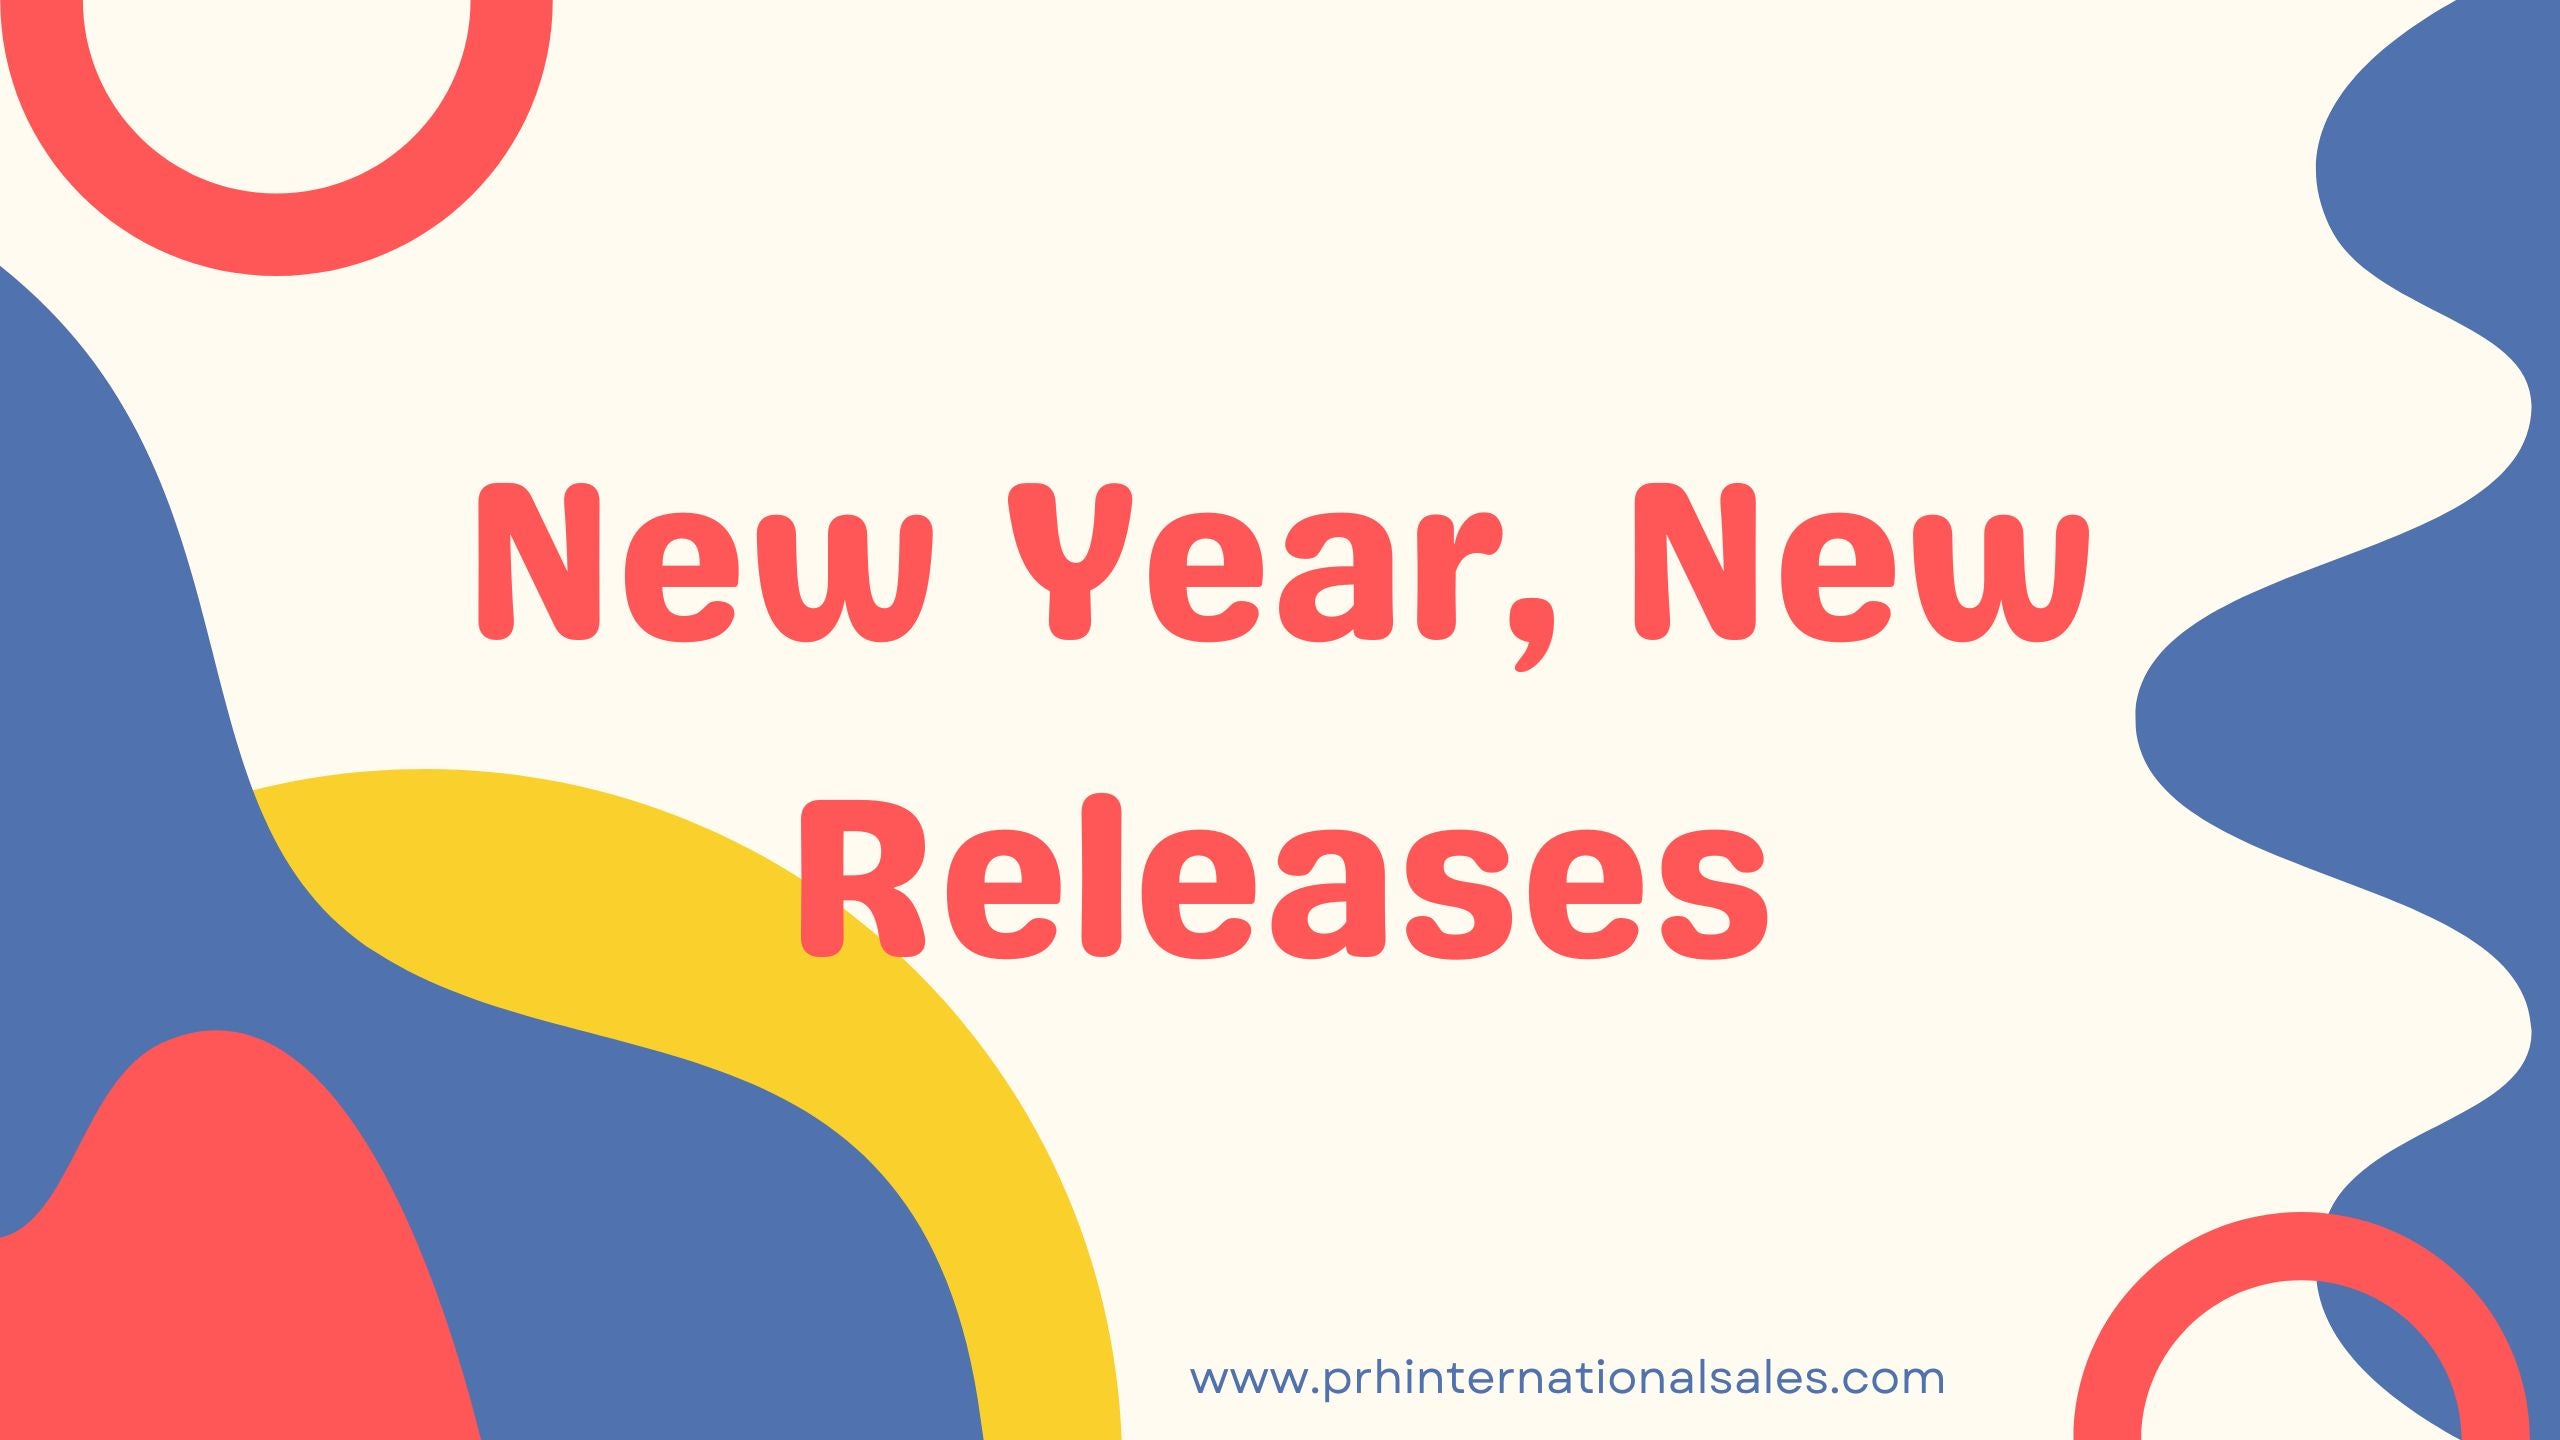 Ring in the New Year by Taking a Look at Our Newest Releases!